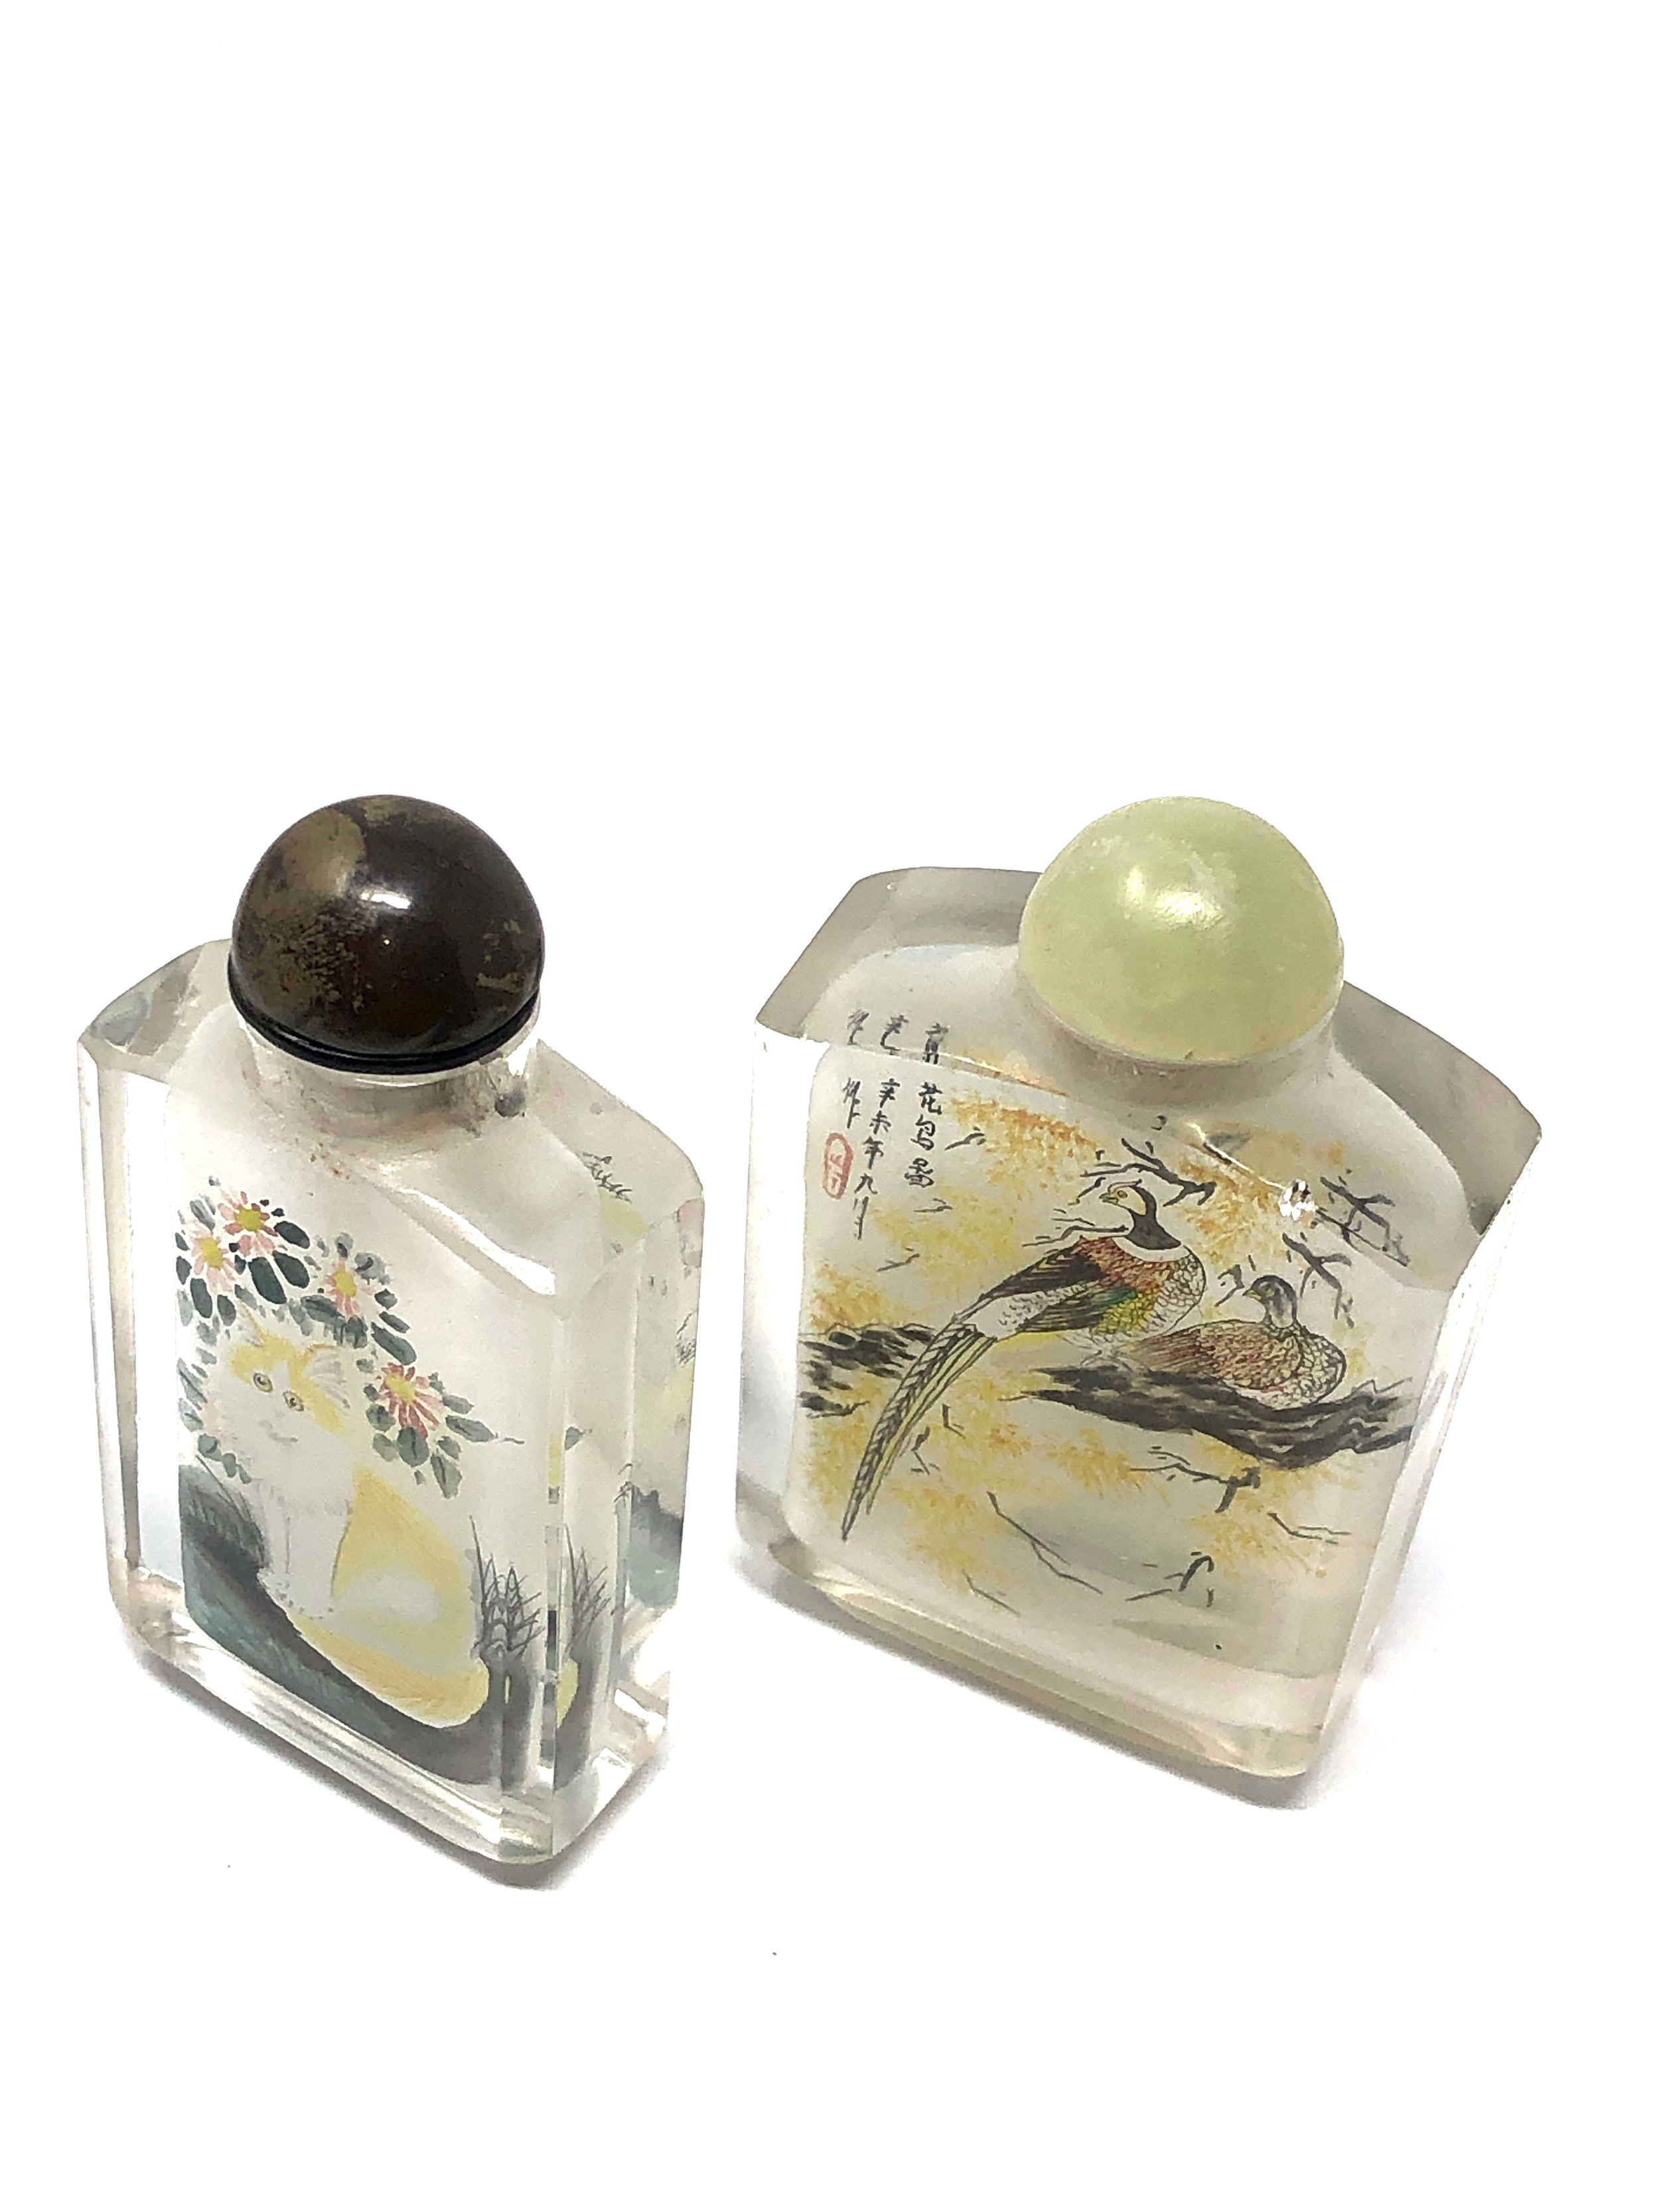 2 Vintage Chinese Inside Reverse Hand Painted Glass Perfume Snuff Bottles - Image 2 of 4